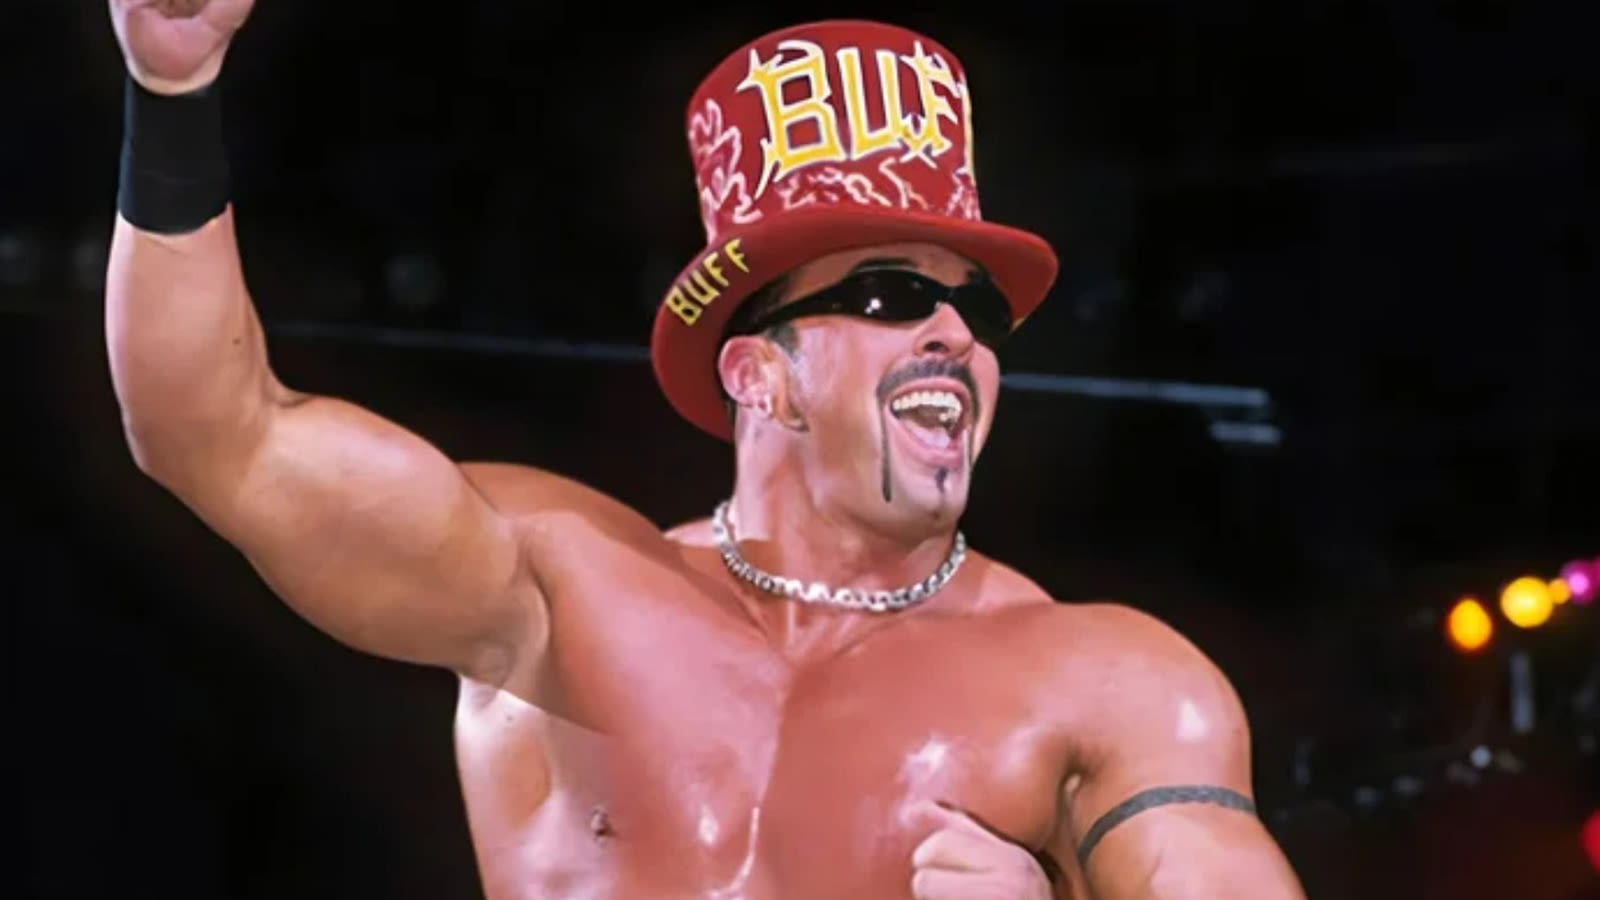 Former WCW Star Buff Bagwell Wins Gold At Memphis Wrestling Event - Wrestling Inc.